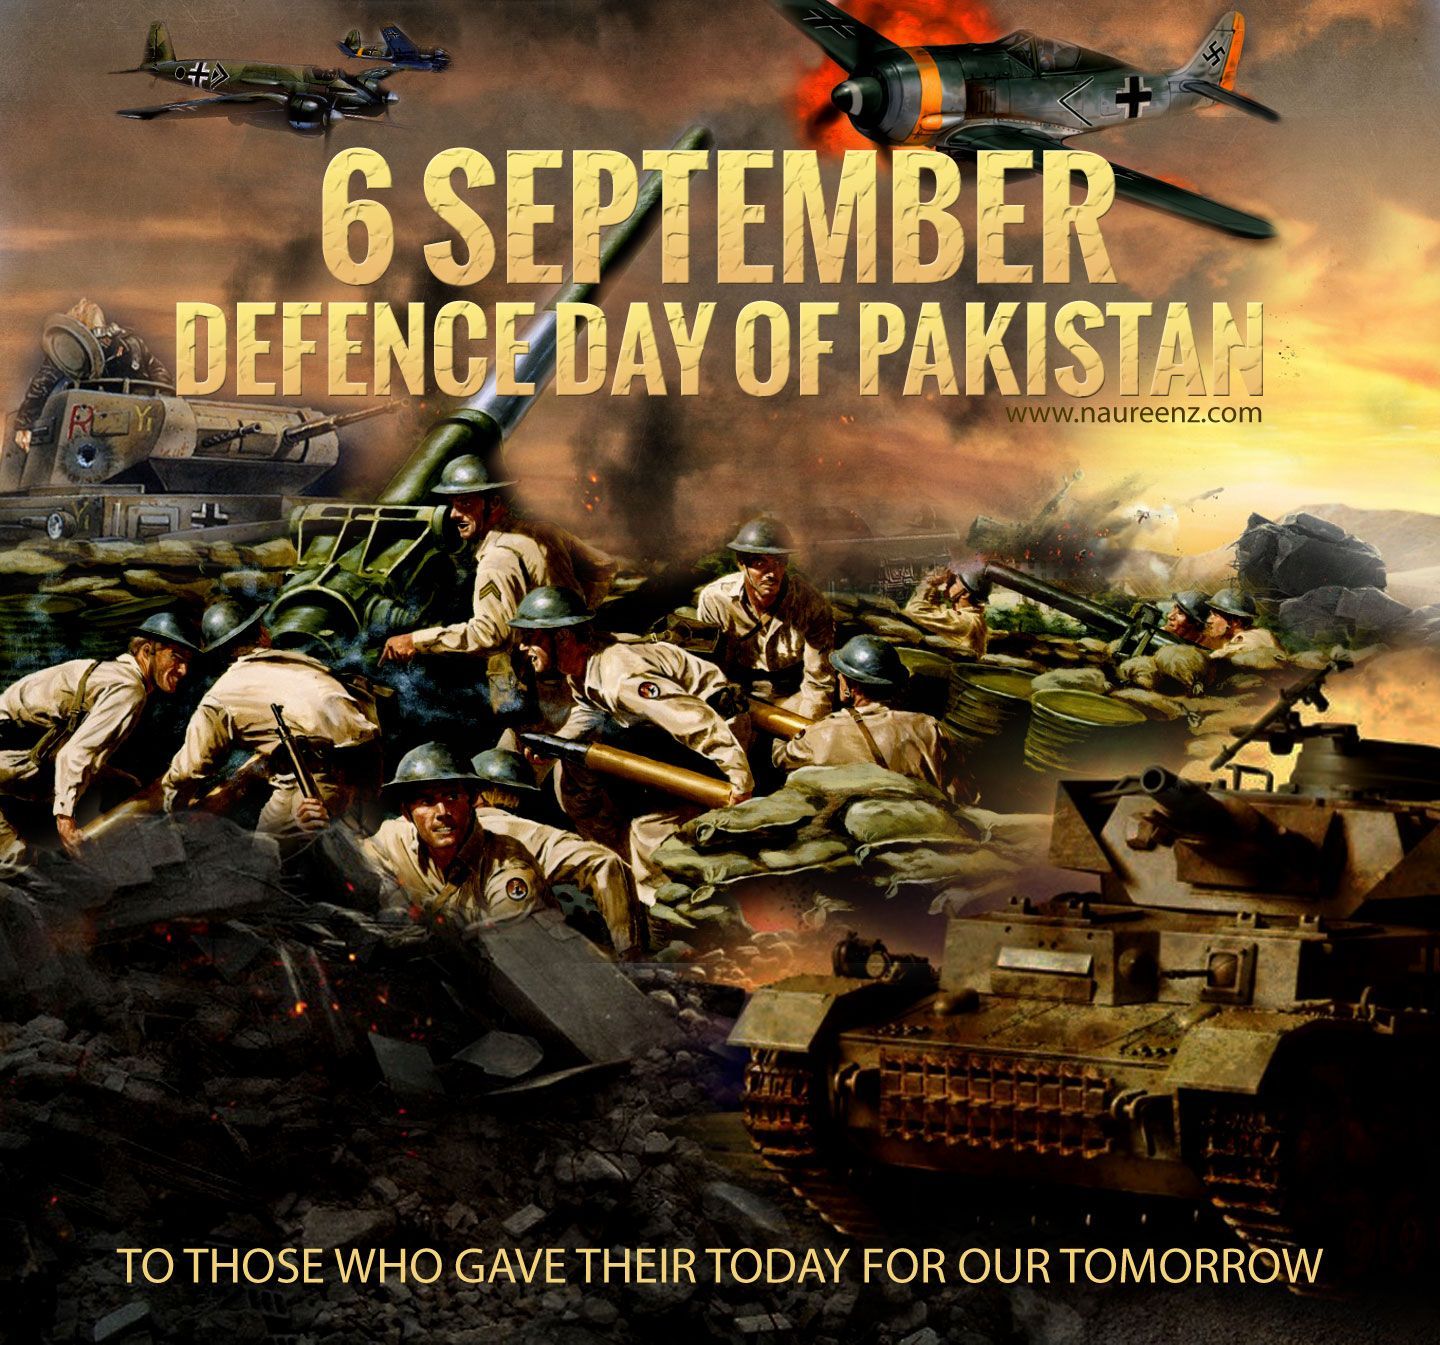 Defense Day is celebrated on 6th September every year in Pakistan